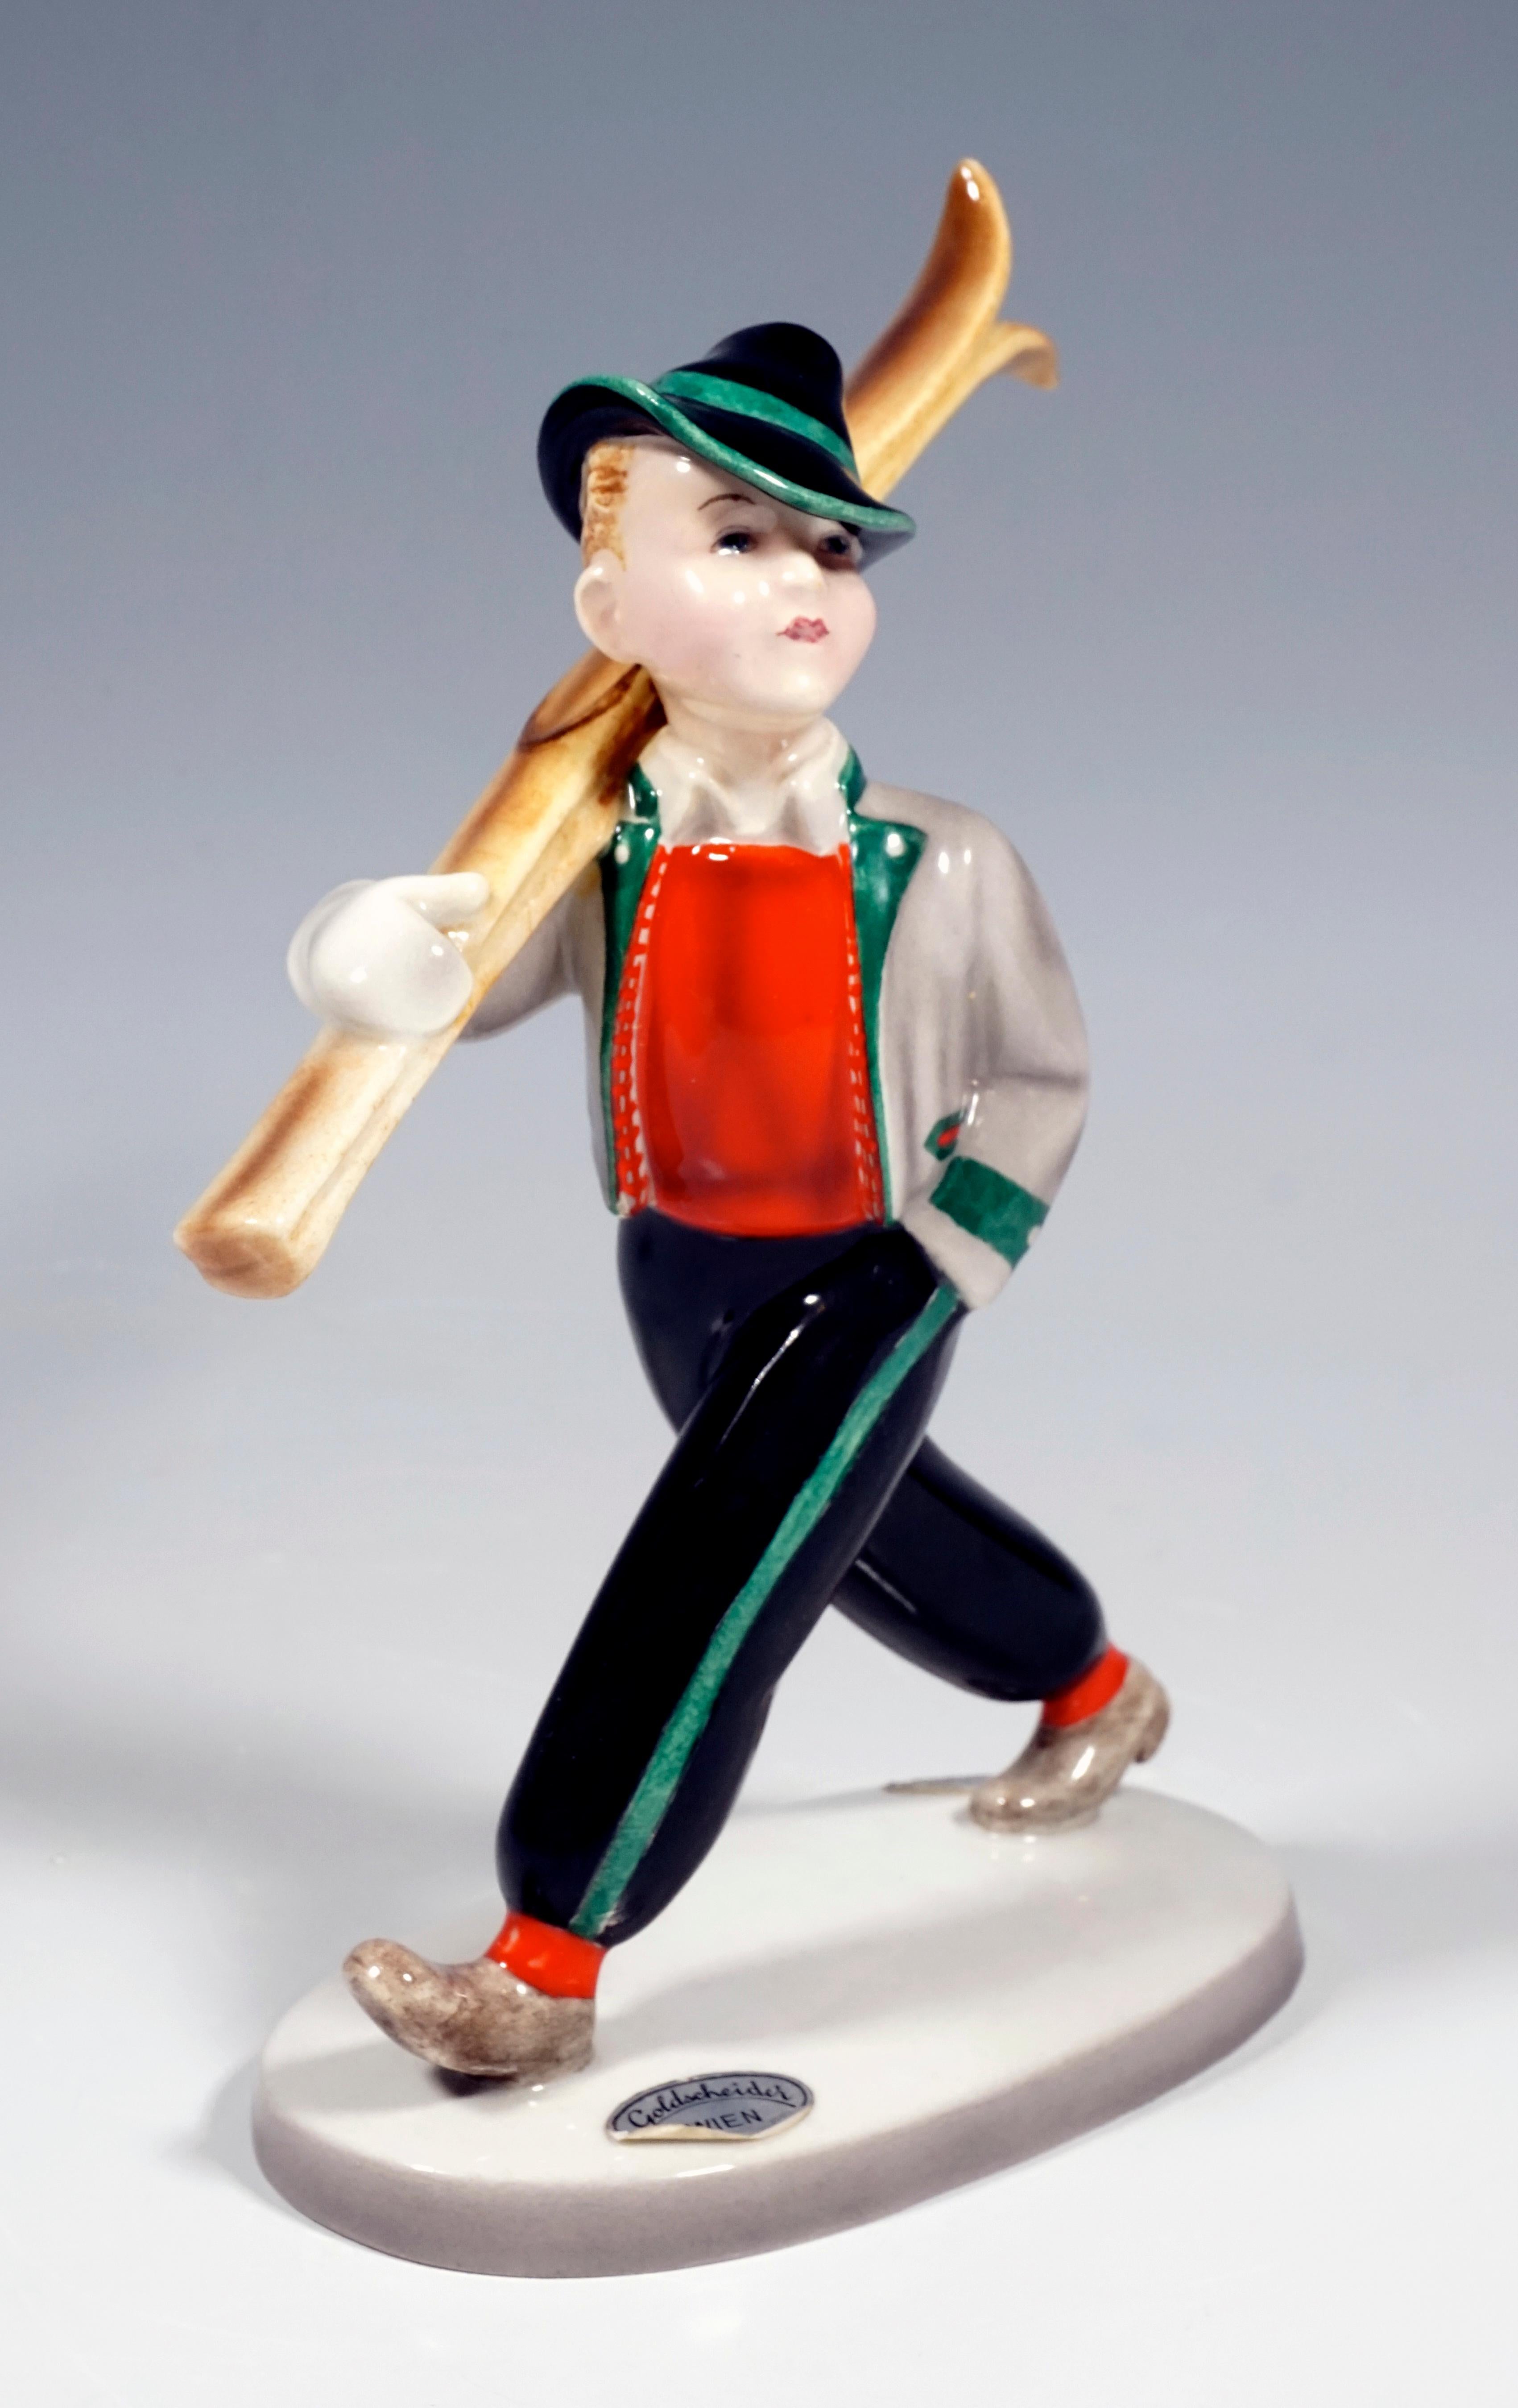 Rare Goldscheider Vienna Figurine of the 1930s.
Striding boy with shouldered skis, wearing the winter clothing customary in Tyrol in the 1930s: black trousers with cuffs and jacket in traditional style and a Tyrolean hat.
On a cream-colored oval